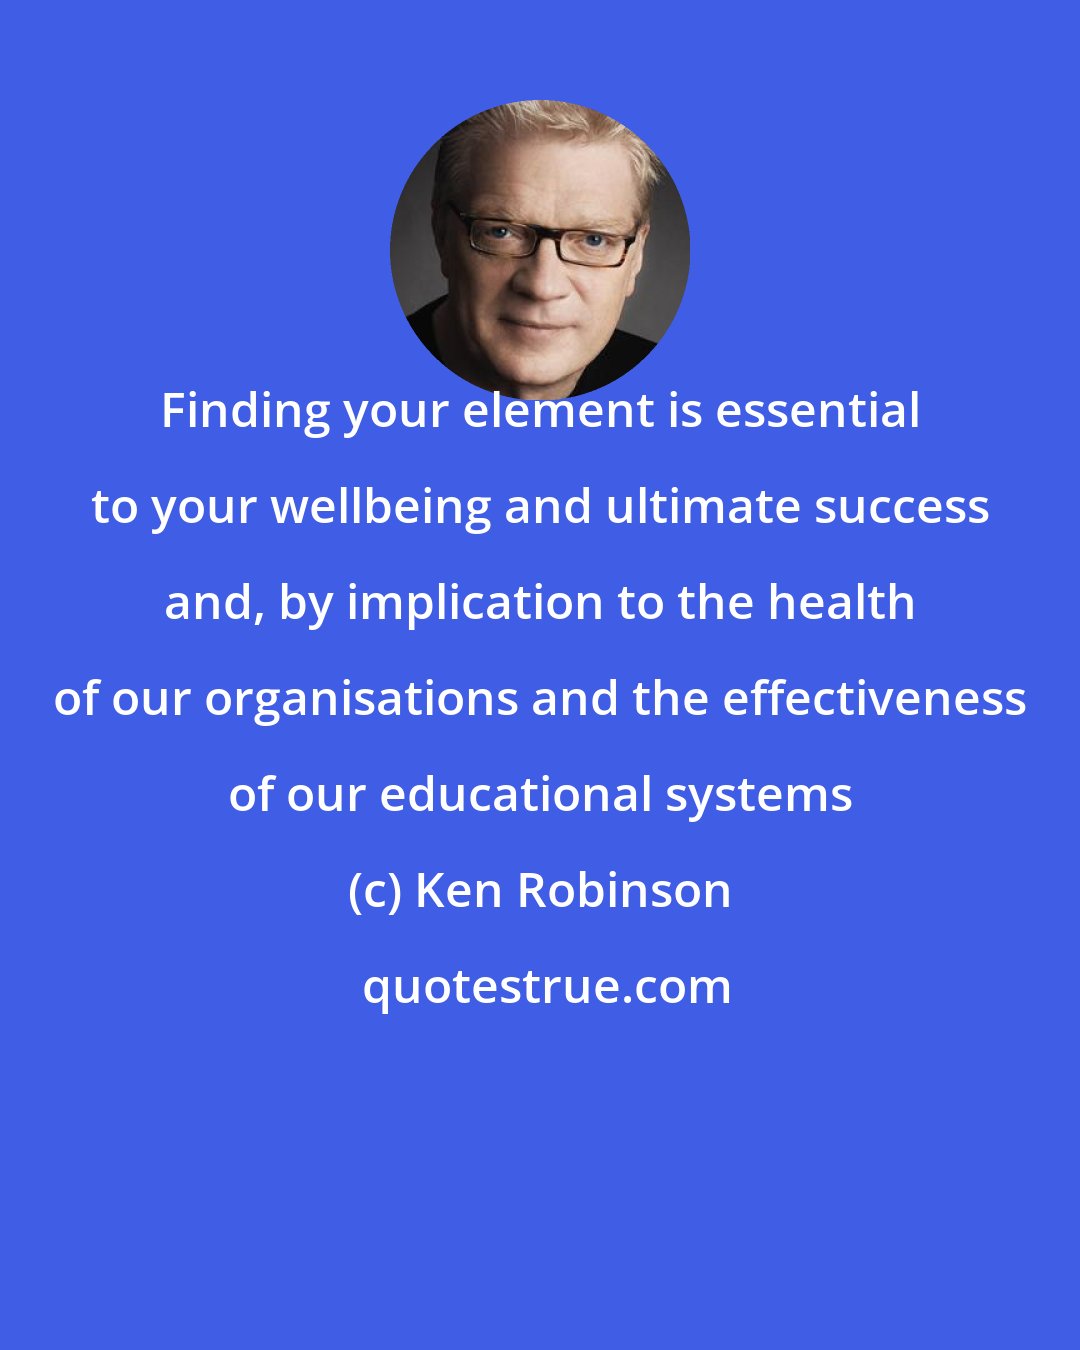 Ken Robinson: Finding your element is essential to your wellbeing and ultimate success and, by implication to the health of our organisations and the effectiveness of our educational systems